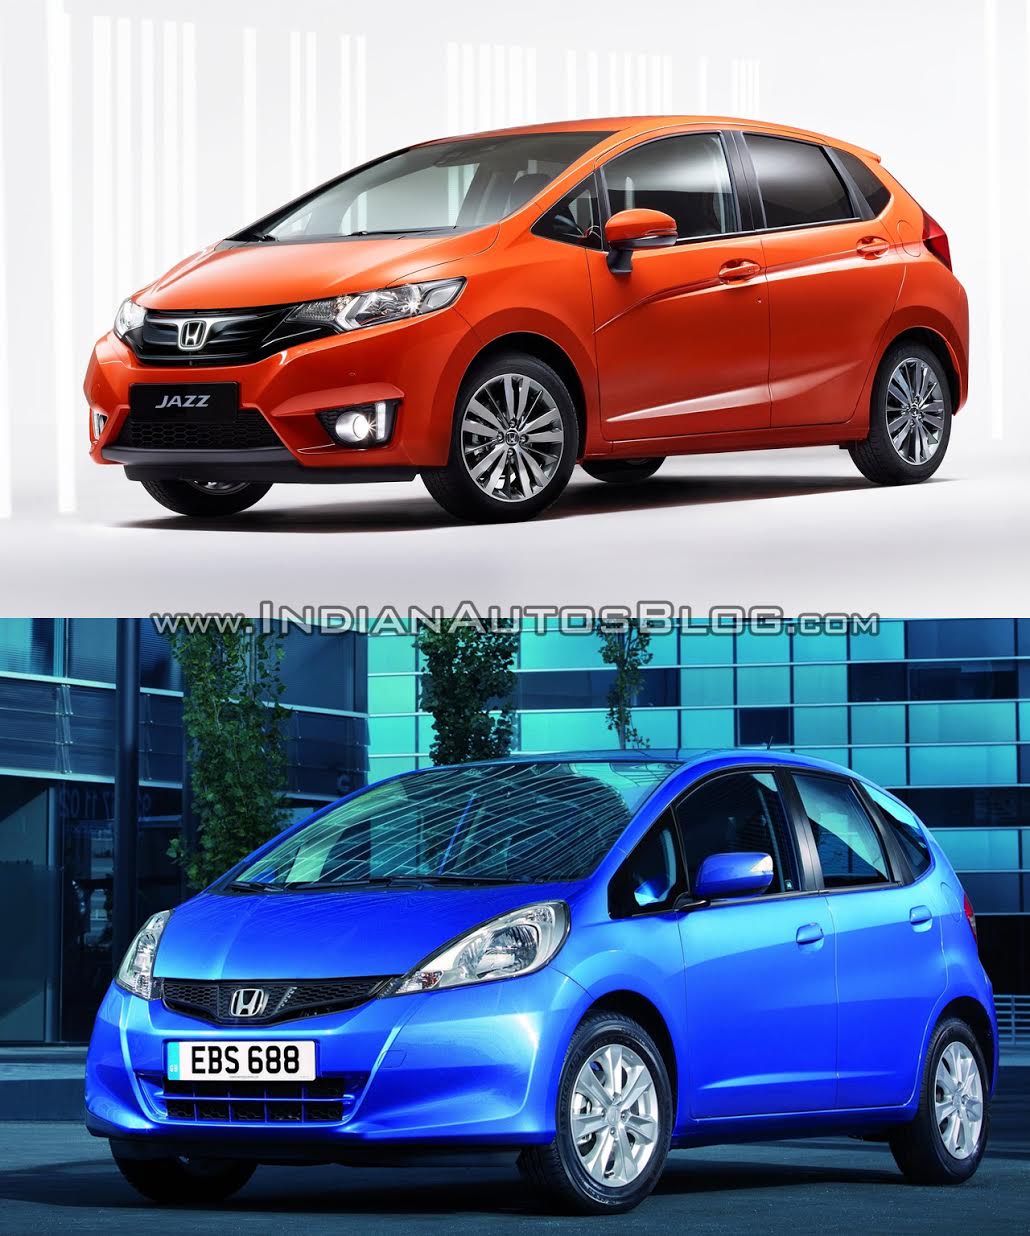 Used Honda Jazz review: 2008-2010 | CarsGuide